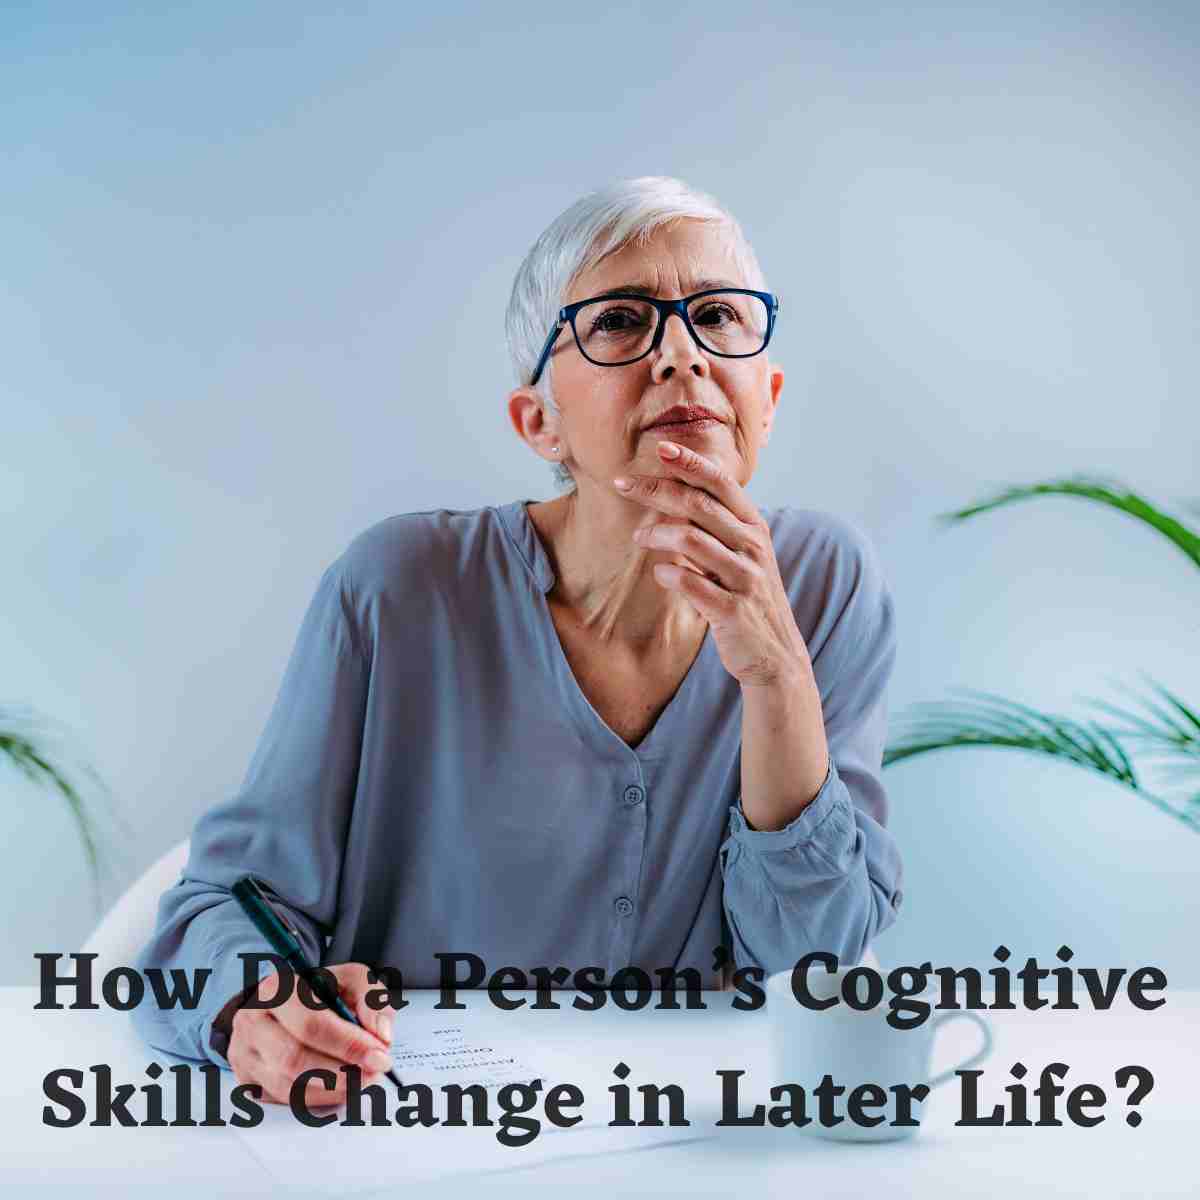 How Do a Person’s Cognitive Skills Change in Later Life